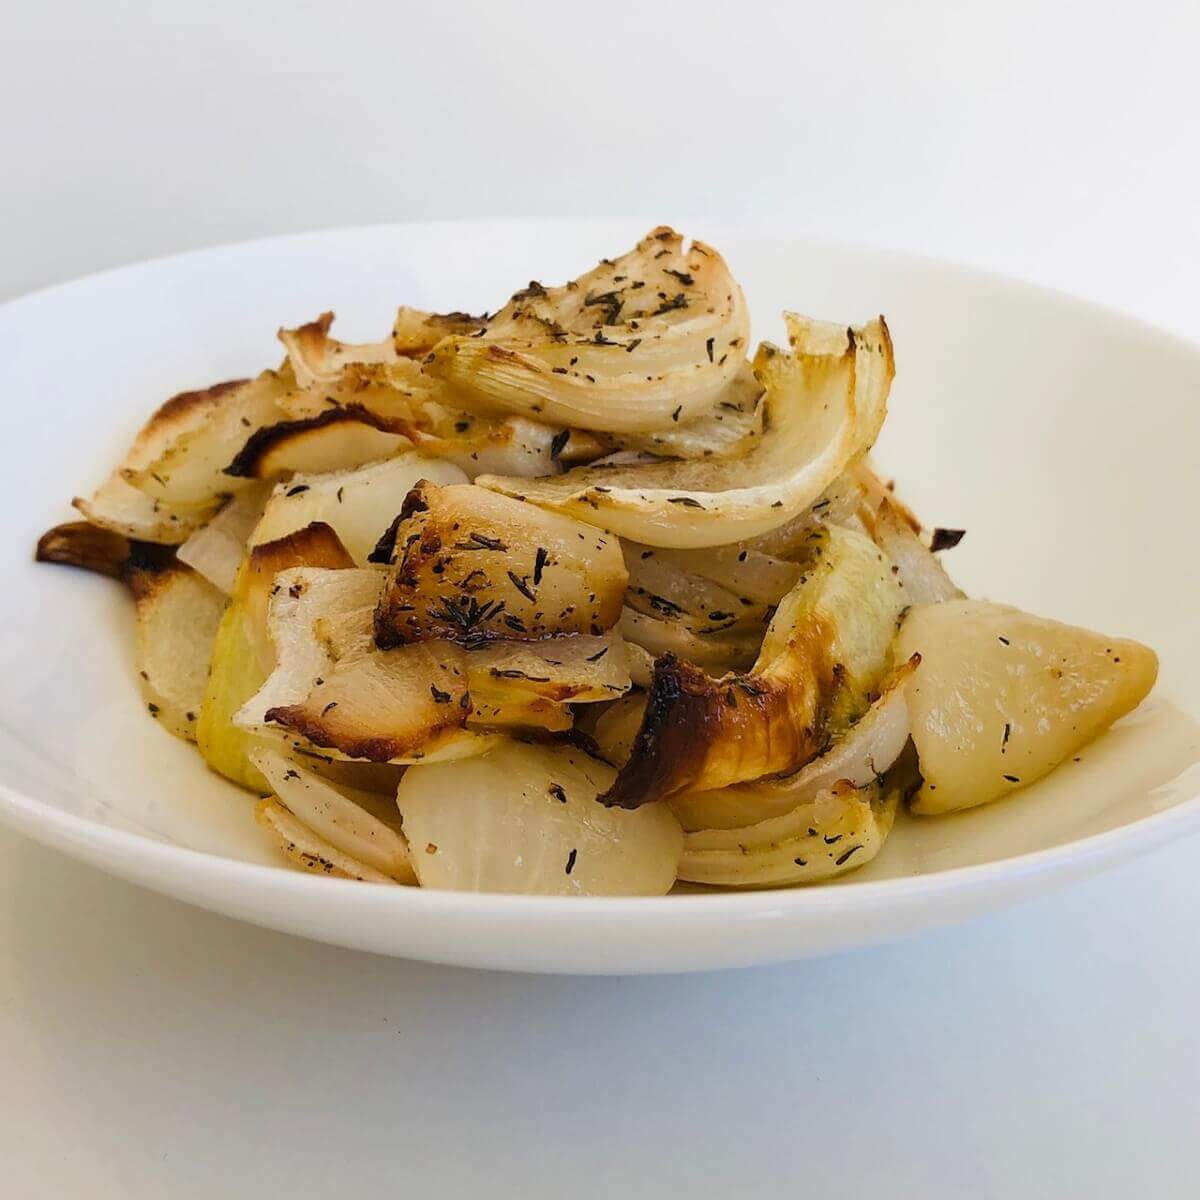 Slow roasted onions in a white serving bowl.